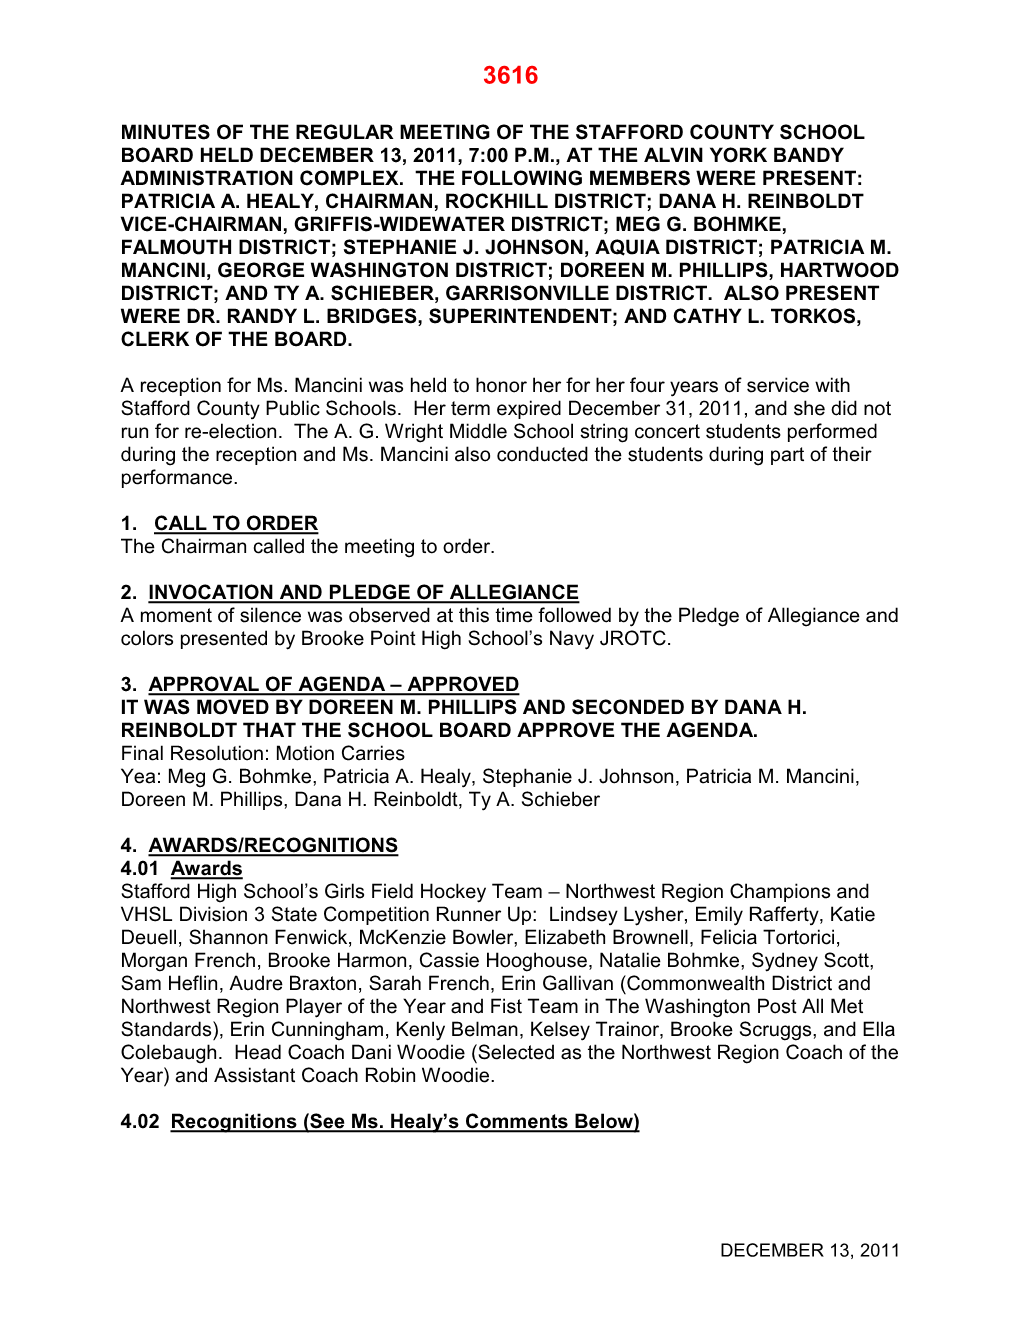 Minutes of the Regular Meeting of the Stafford County School Board Held December 13, 2011, 7:00 P.M., at the Alvin York Bandy Administration Complex